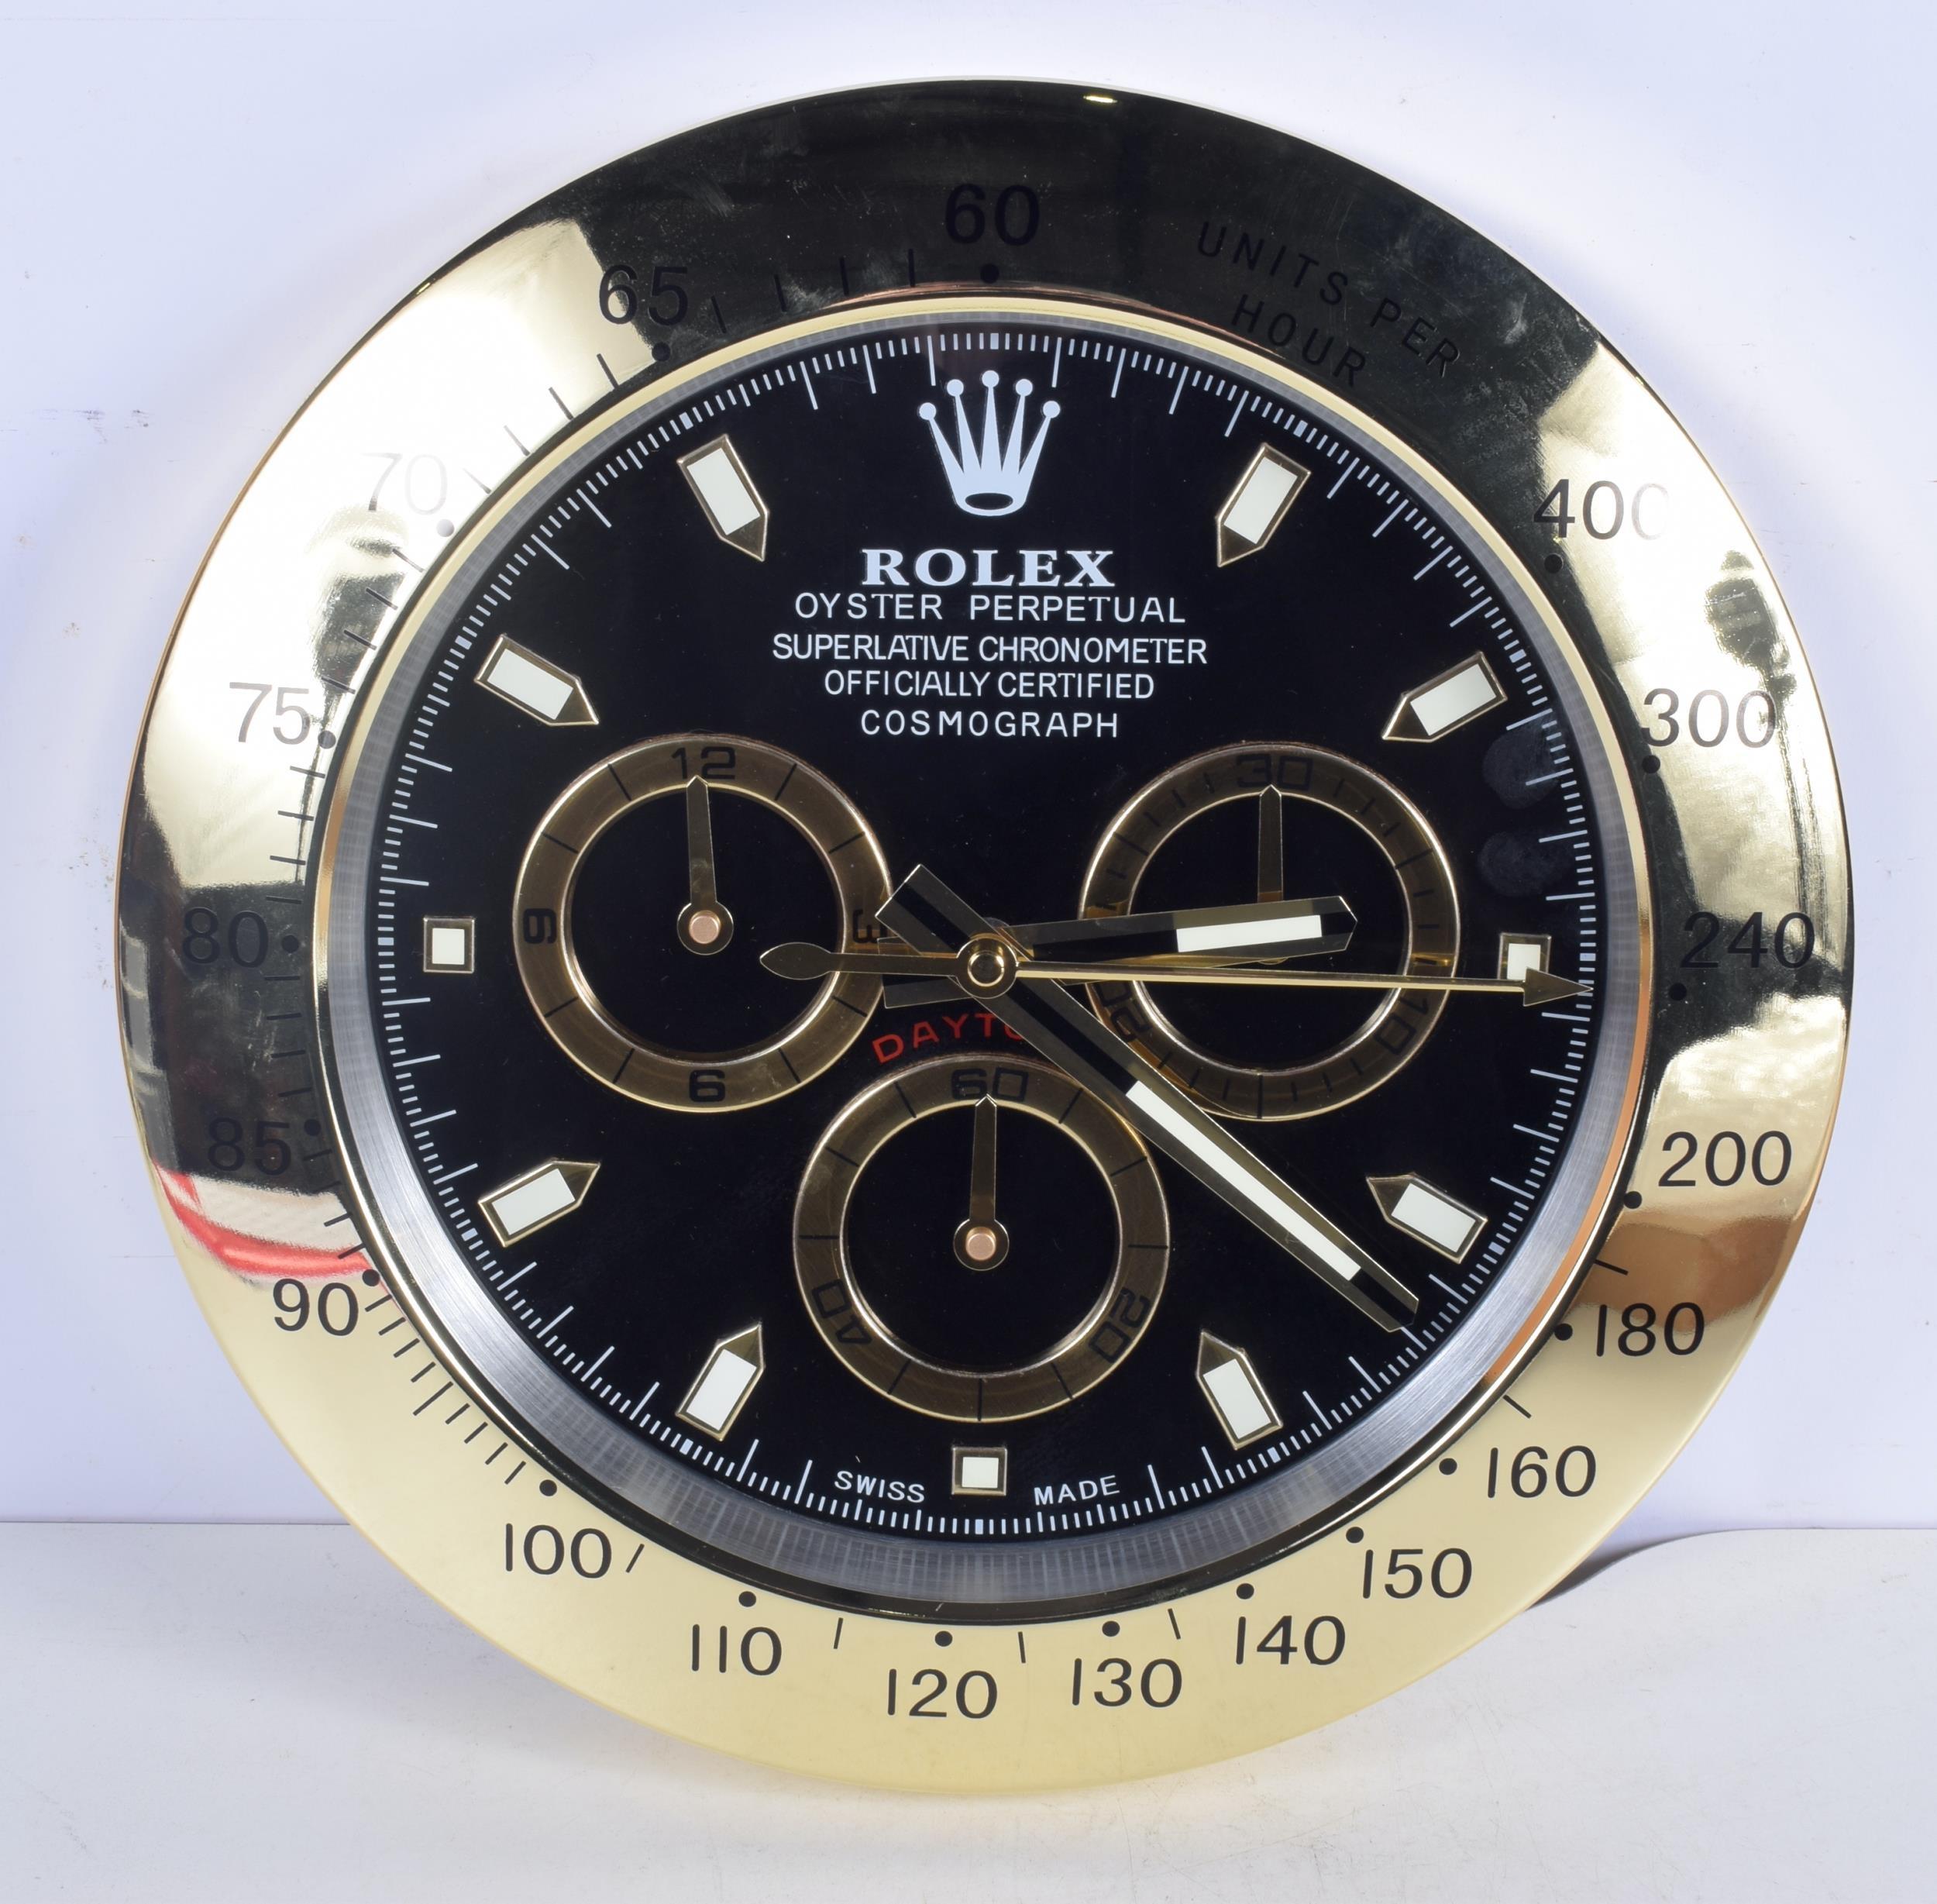 ROLEX Officially Certified Oyster Cosmograph Daytona Gold & Black Wall Clock 
With luminous hands, sweeping hands.
Free international shipping.